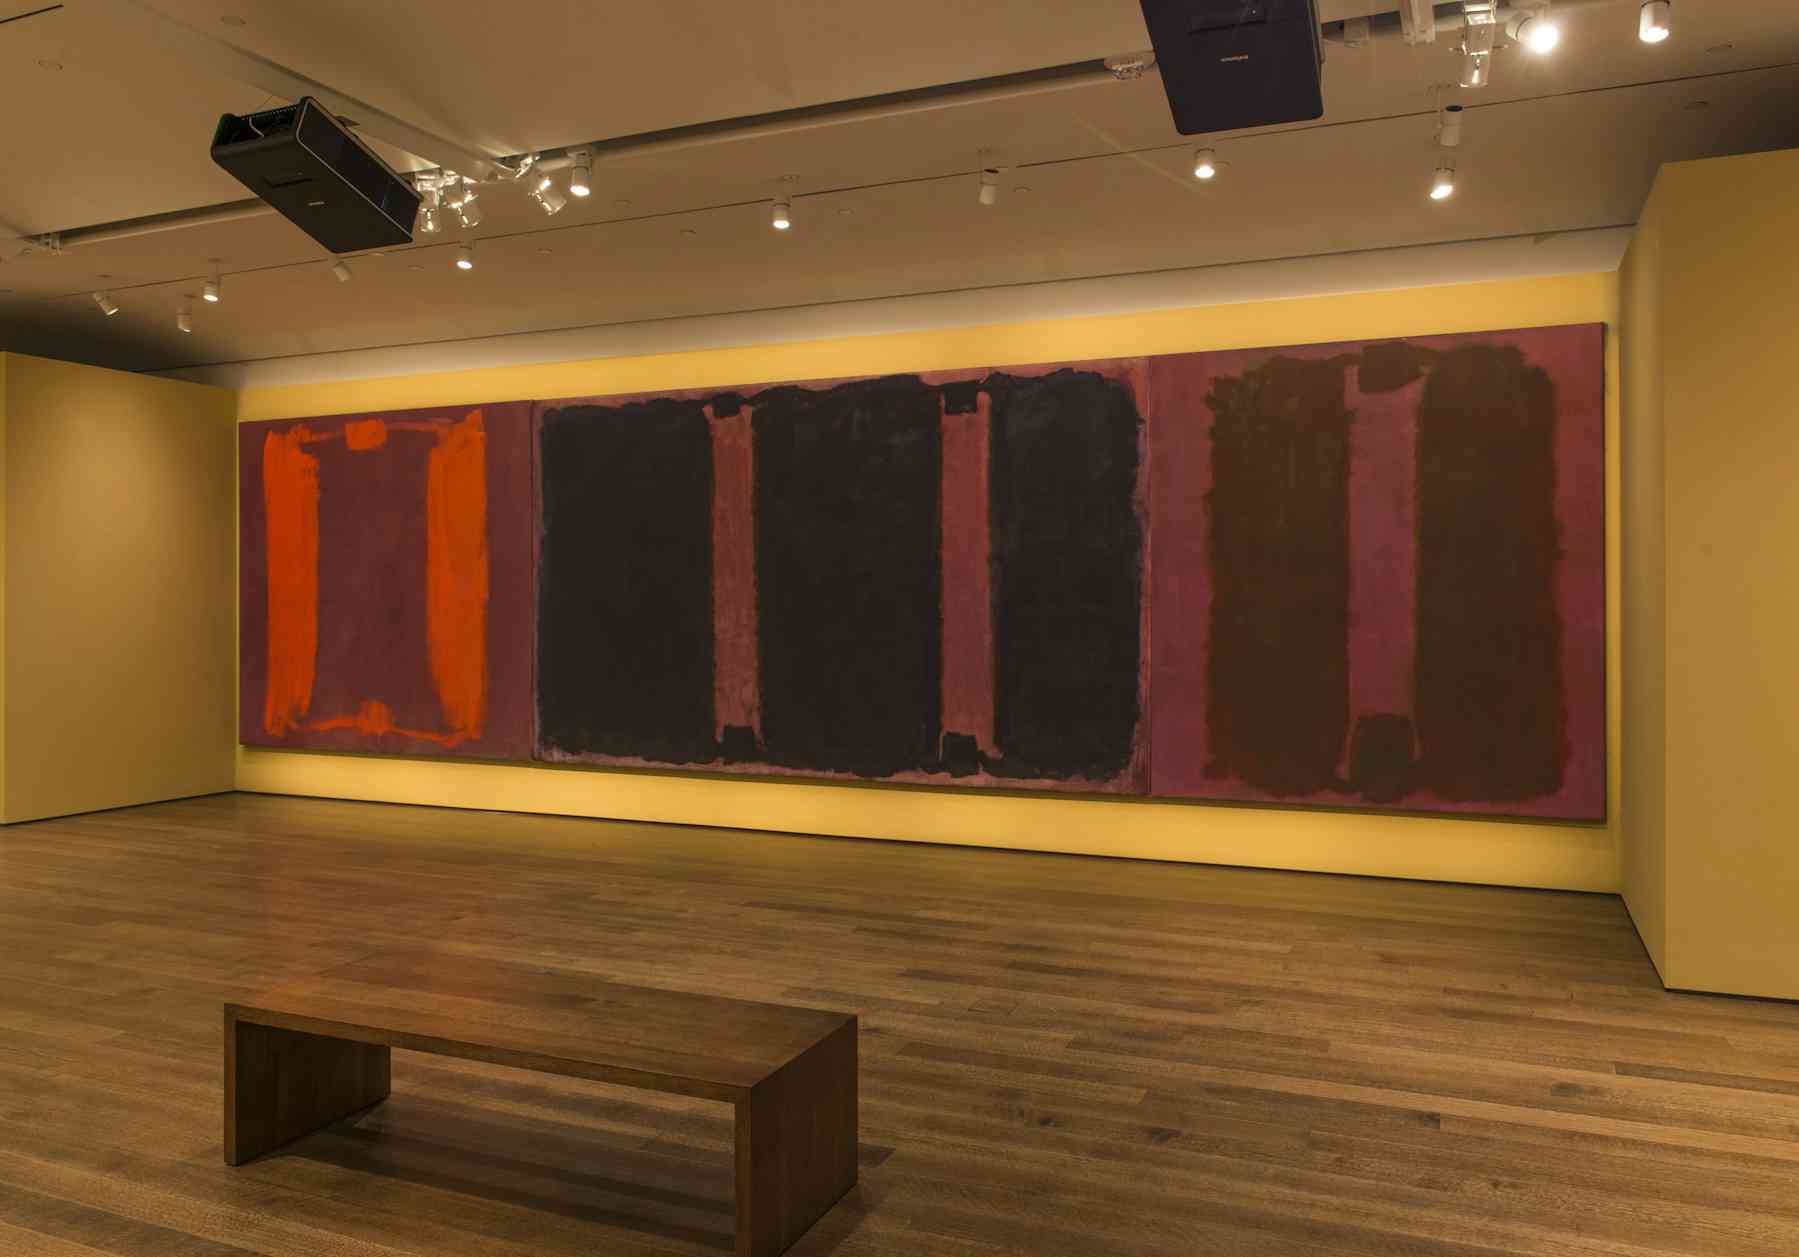 How we restored Harvard's Rothko murals without touching them